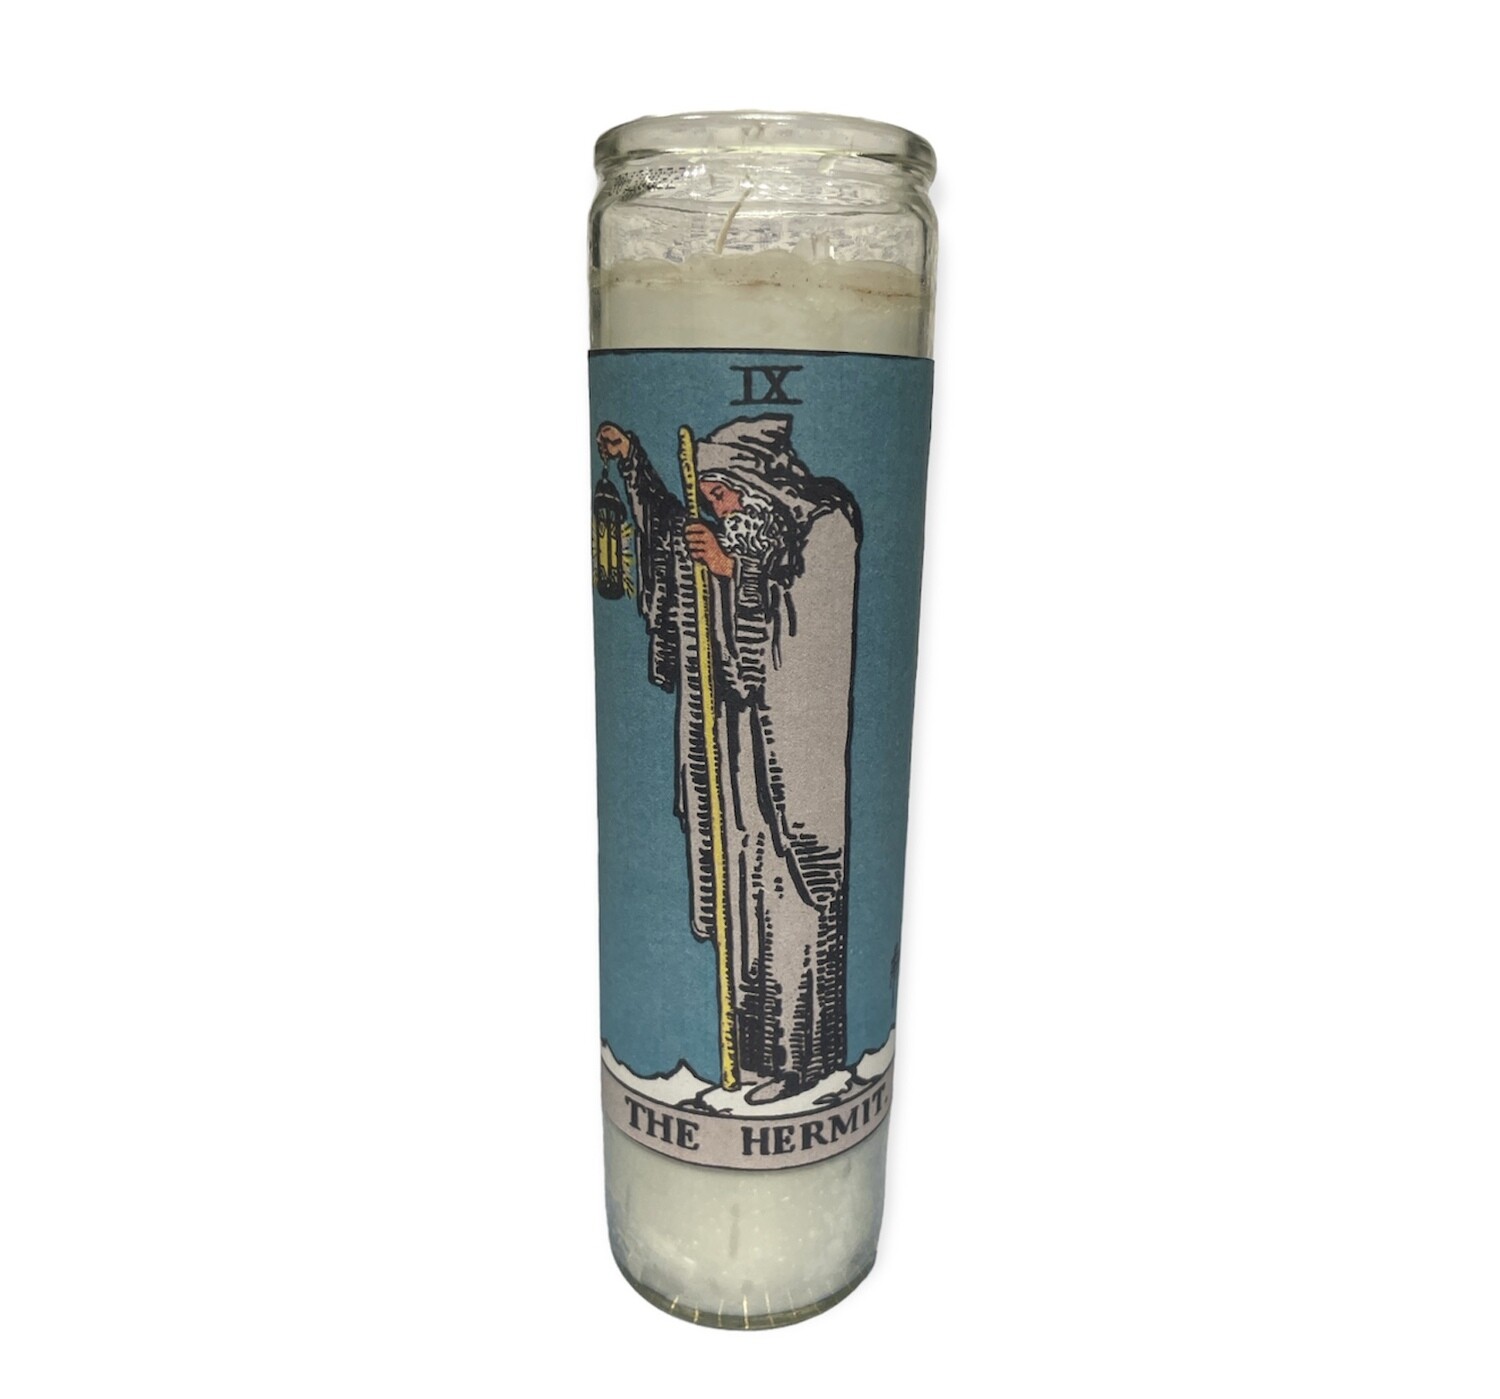 Tarot Candle The Hermit